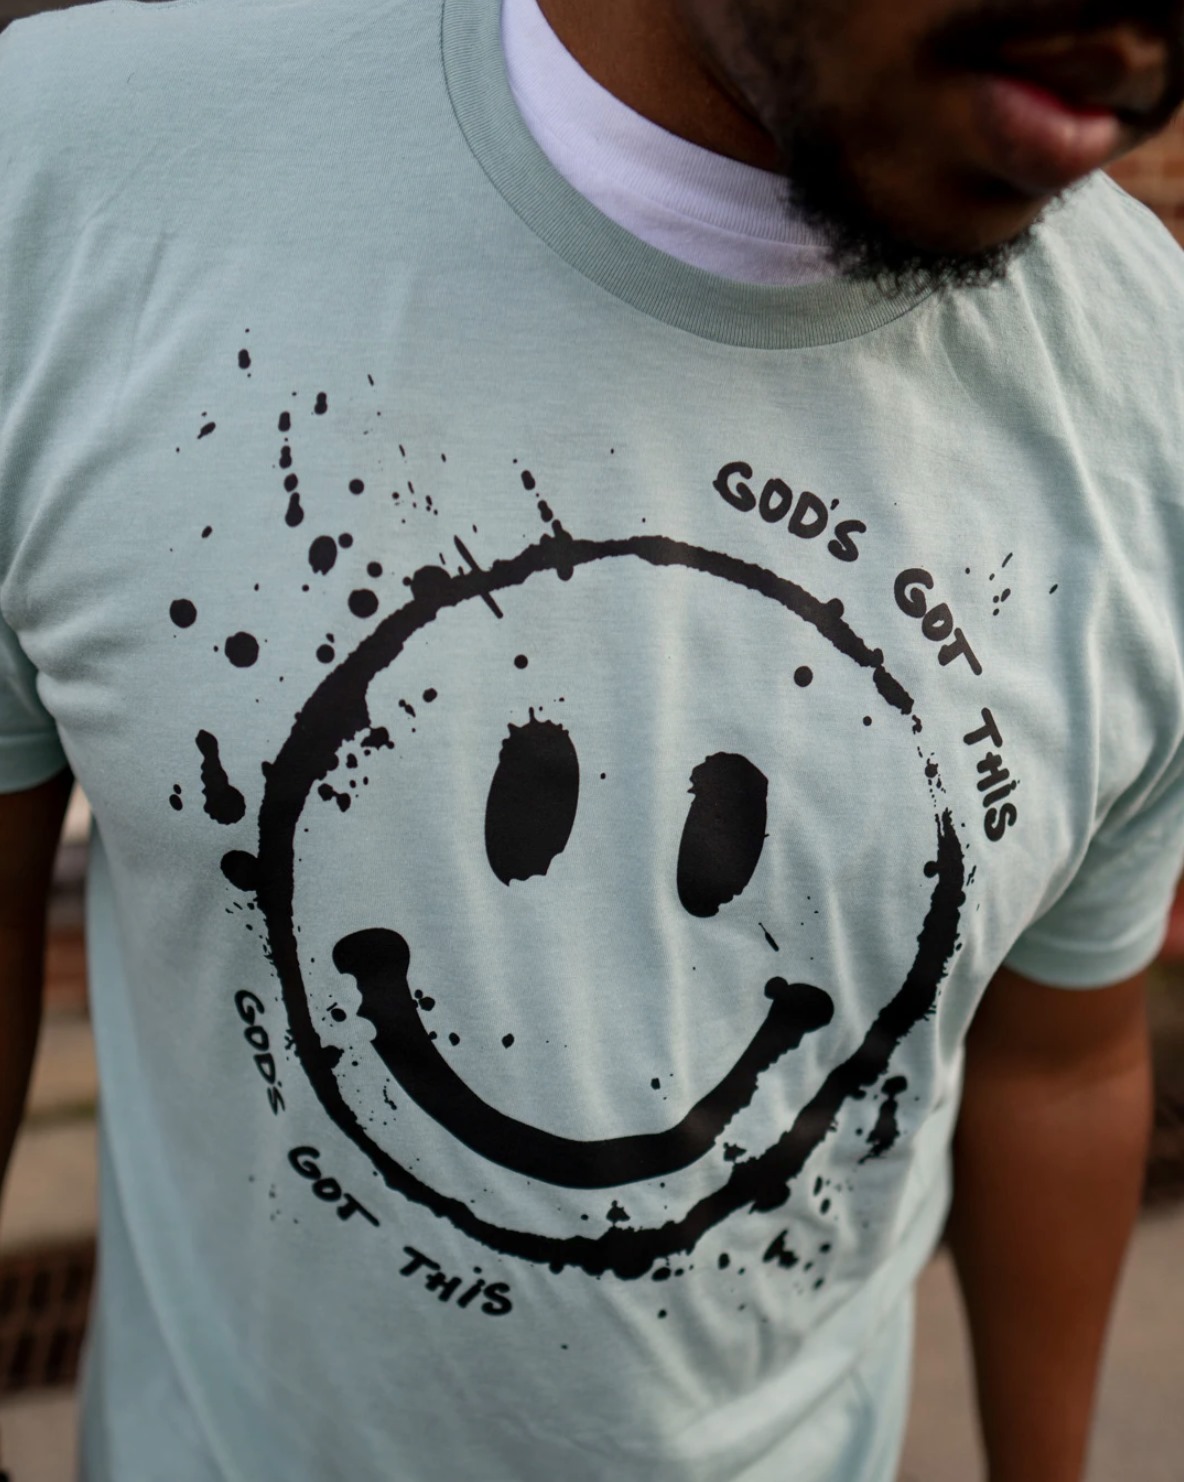 God's got this - Smiling face